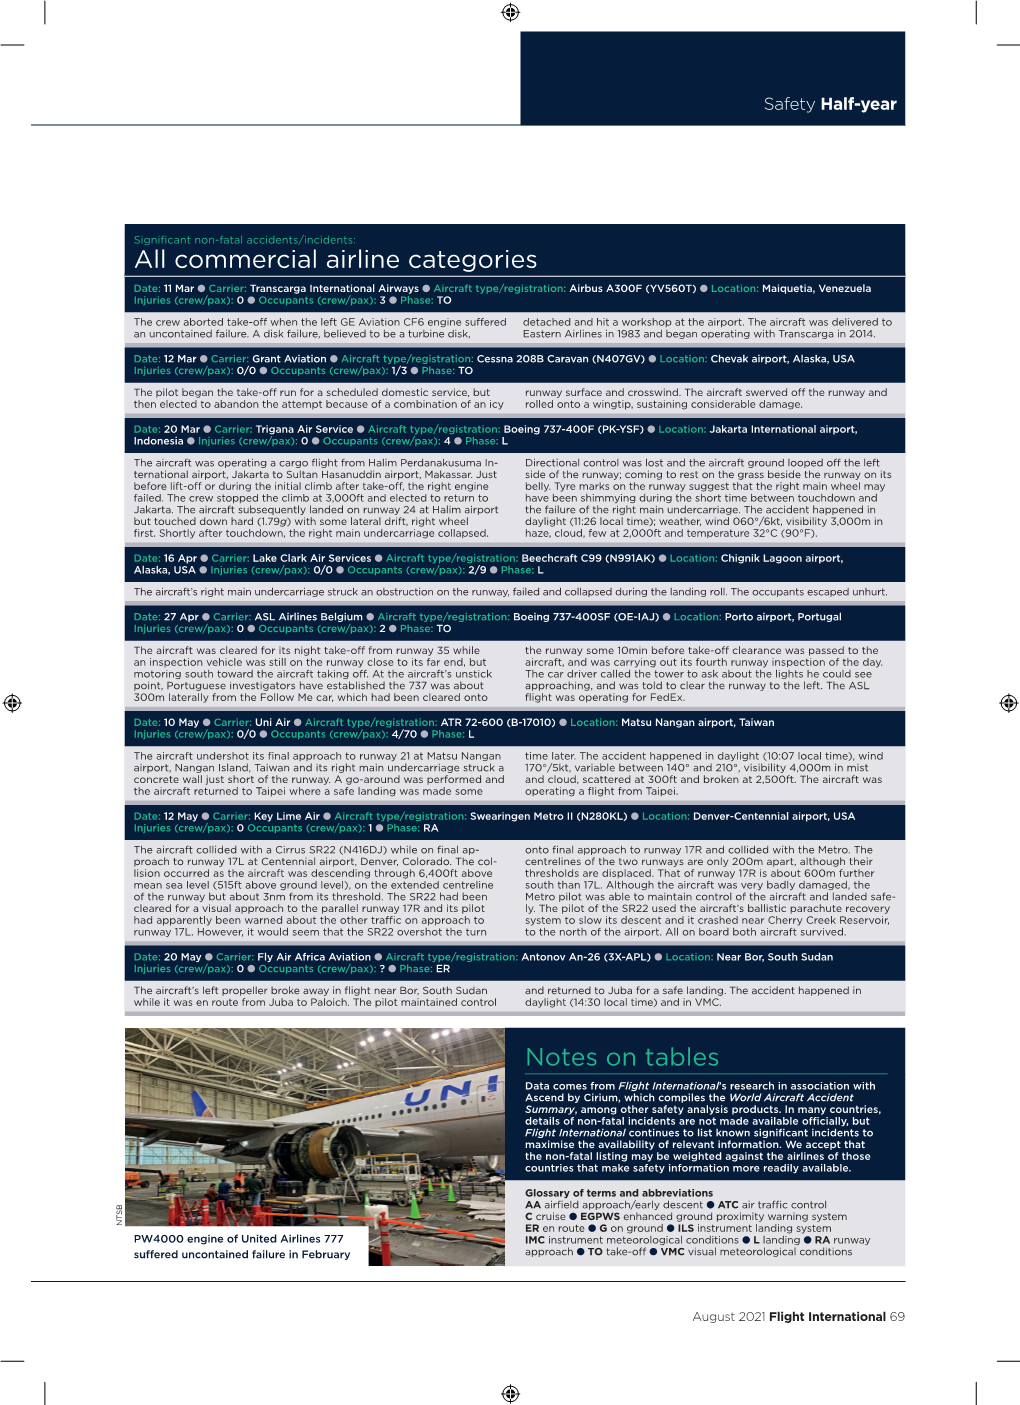 Commercial Airline Categories Notes on Tables